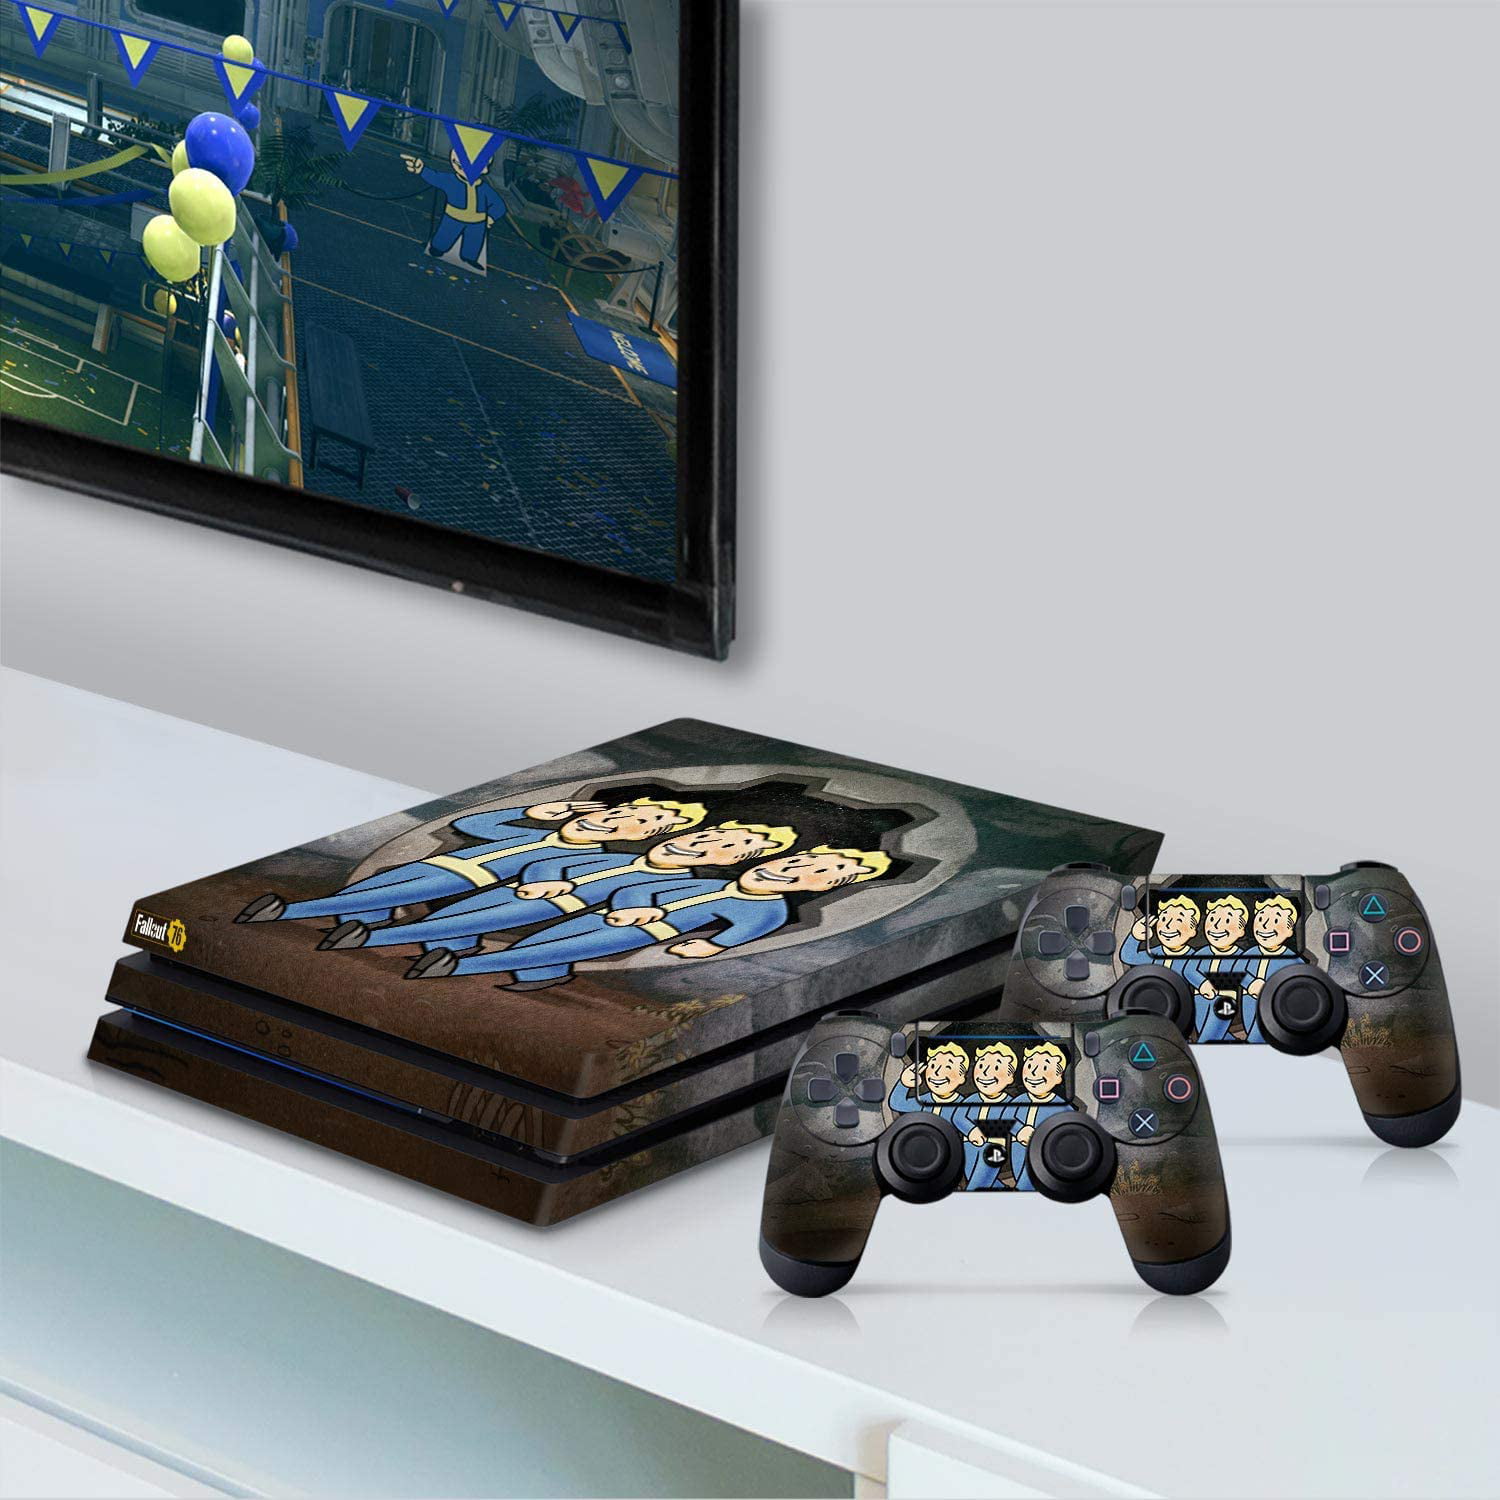 Gear Officially Licensed Console for PS4 - Fallout - Vault Boys - Walmart.com